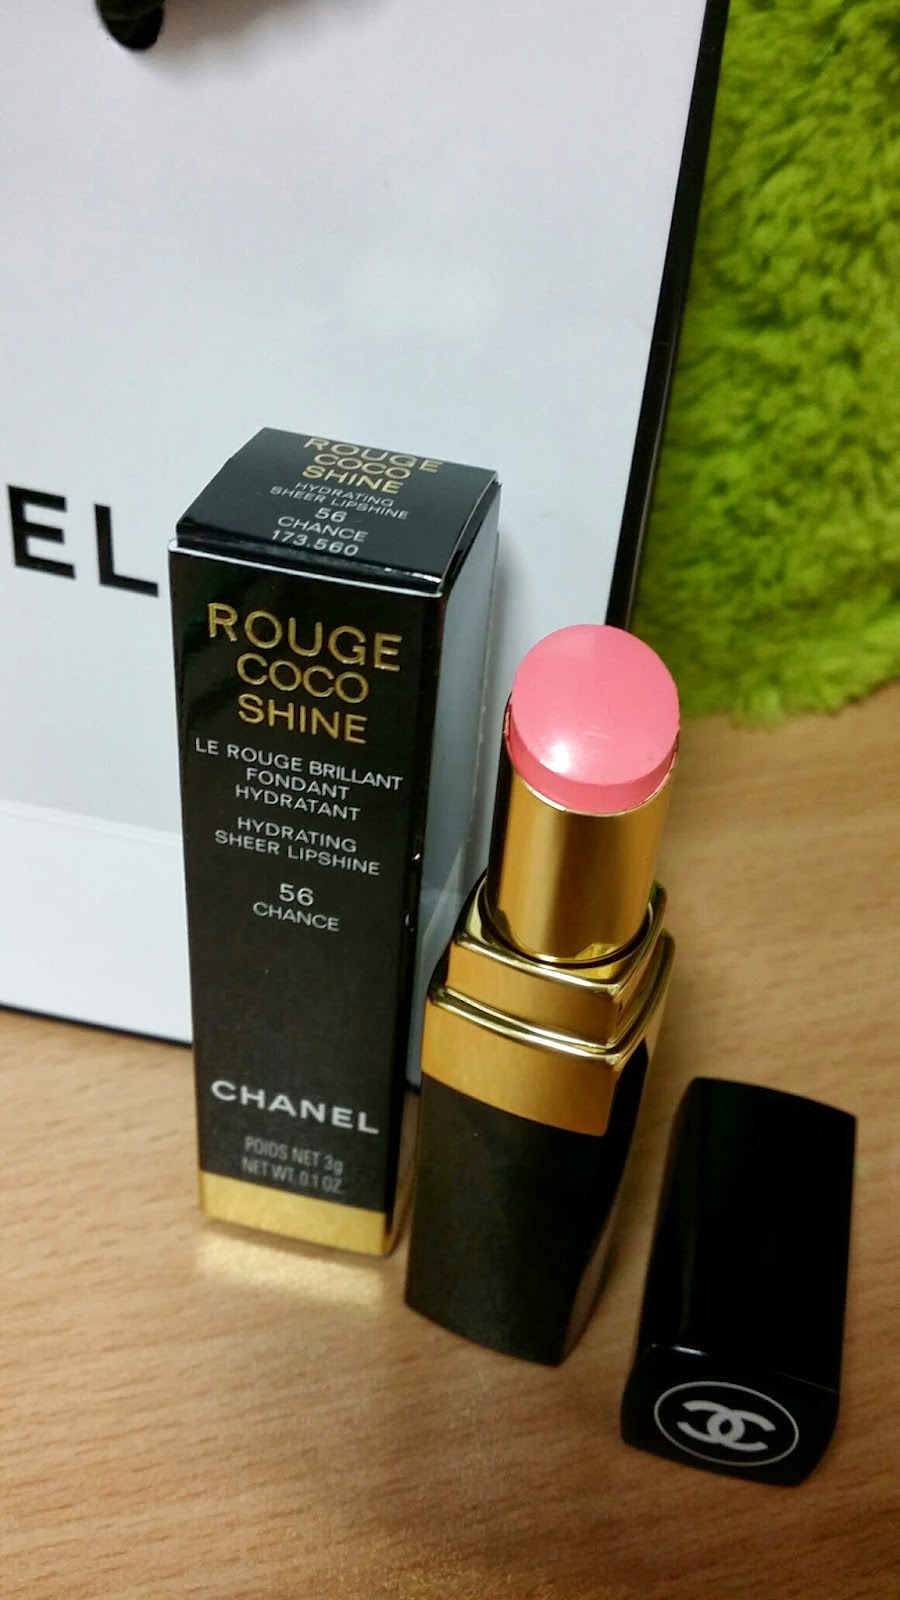 Just some stuffs.: My first Chanel lipstick! - Chanel Rouge Coco